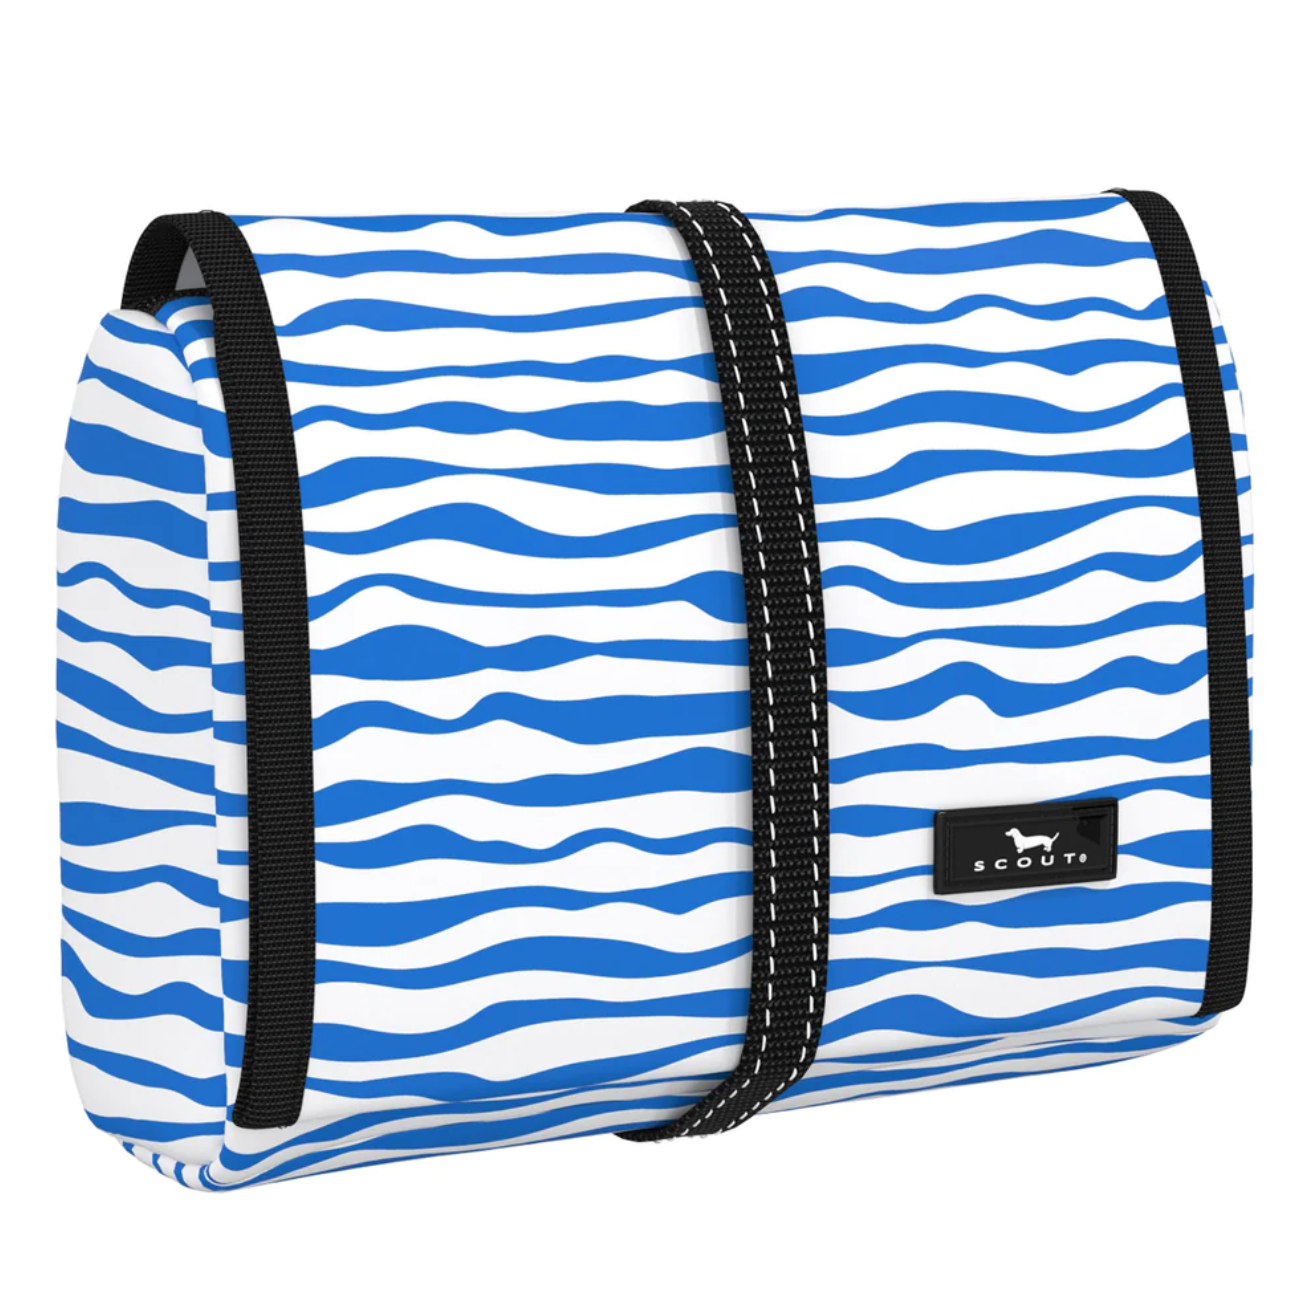 Scout Beauty Burrito Toiletry Bag Travel Accessories in Vitamin Sea at Wrapsody